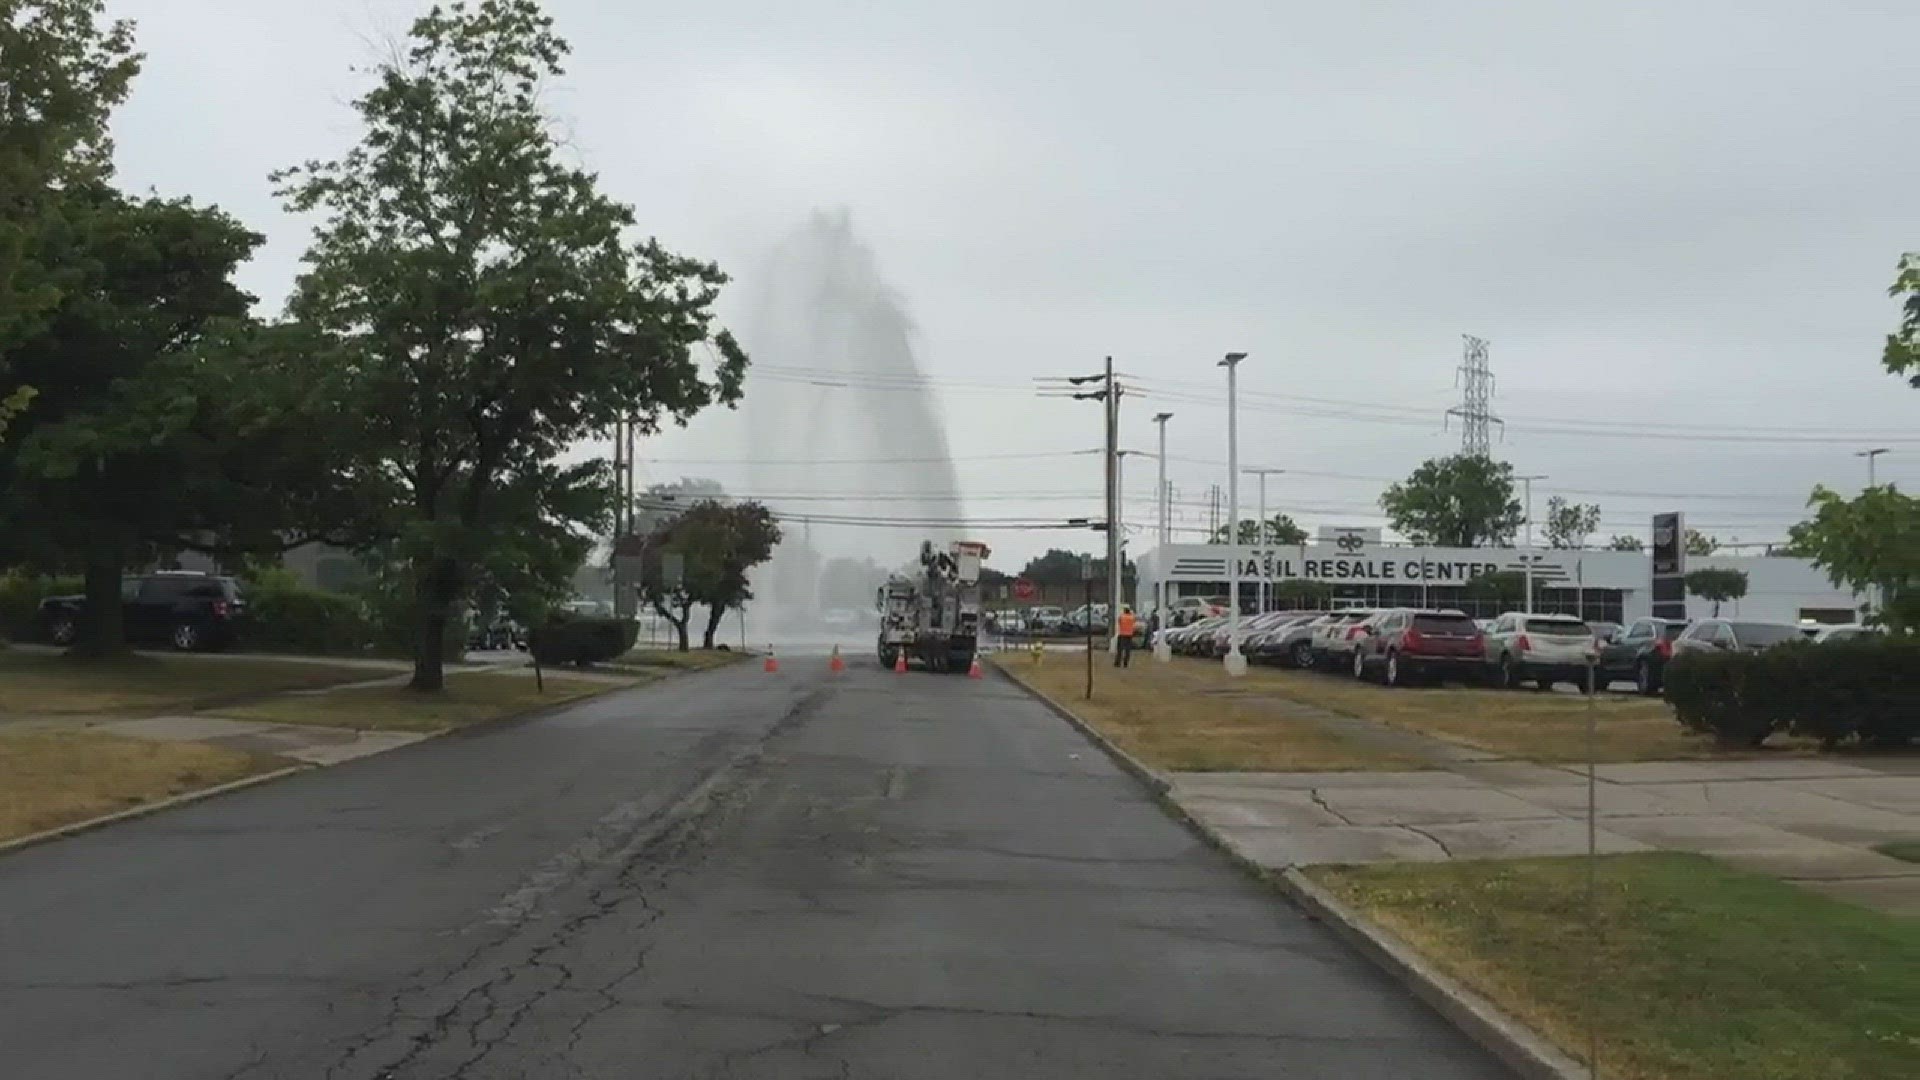 Water main break occurred on Monday around Noon at Sheridan Drive and Sunrise Blvd. in Amherst. Video was sent to us by a WGRZ viewer.